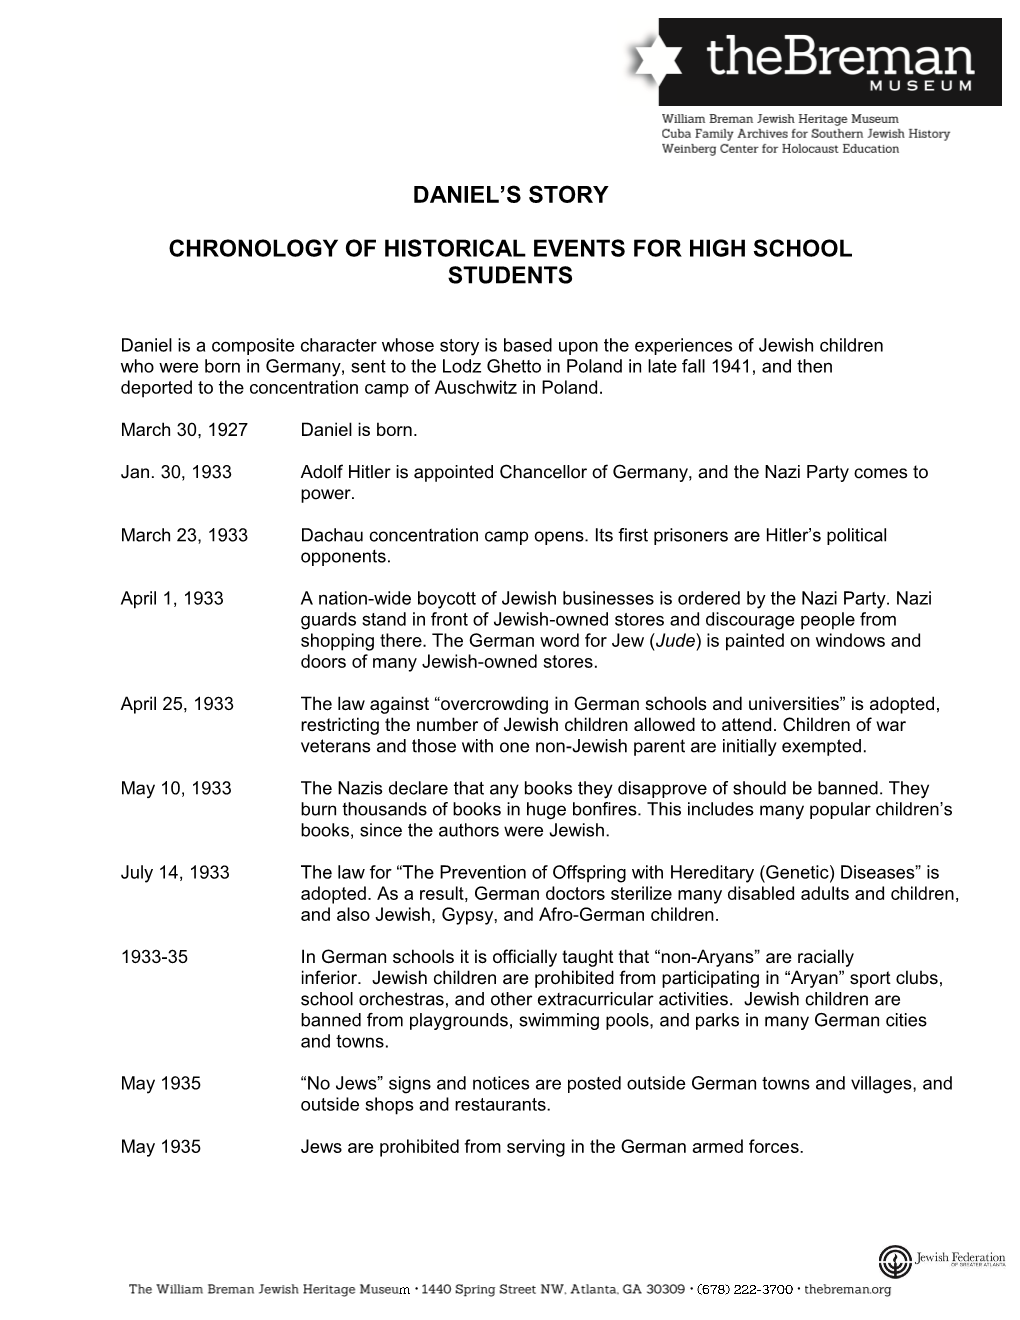 Daniel's Story Chronology of Historical Events for High School Students